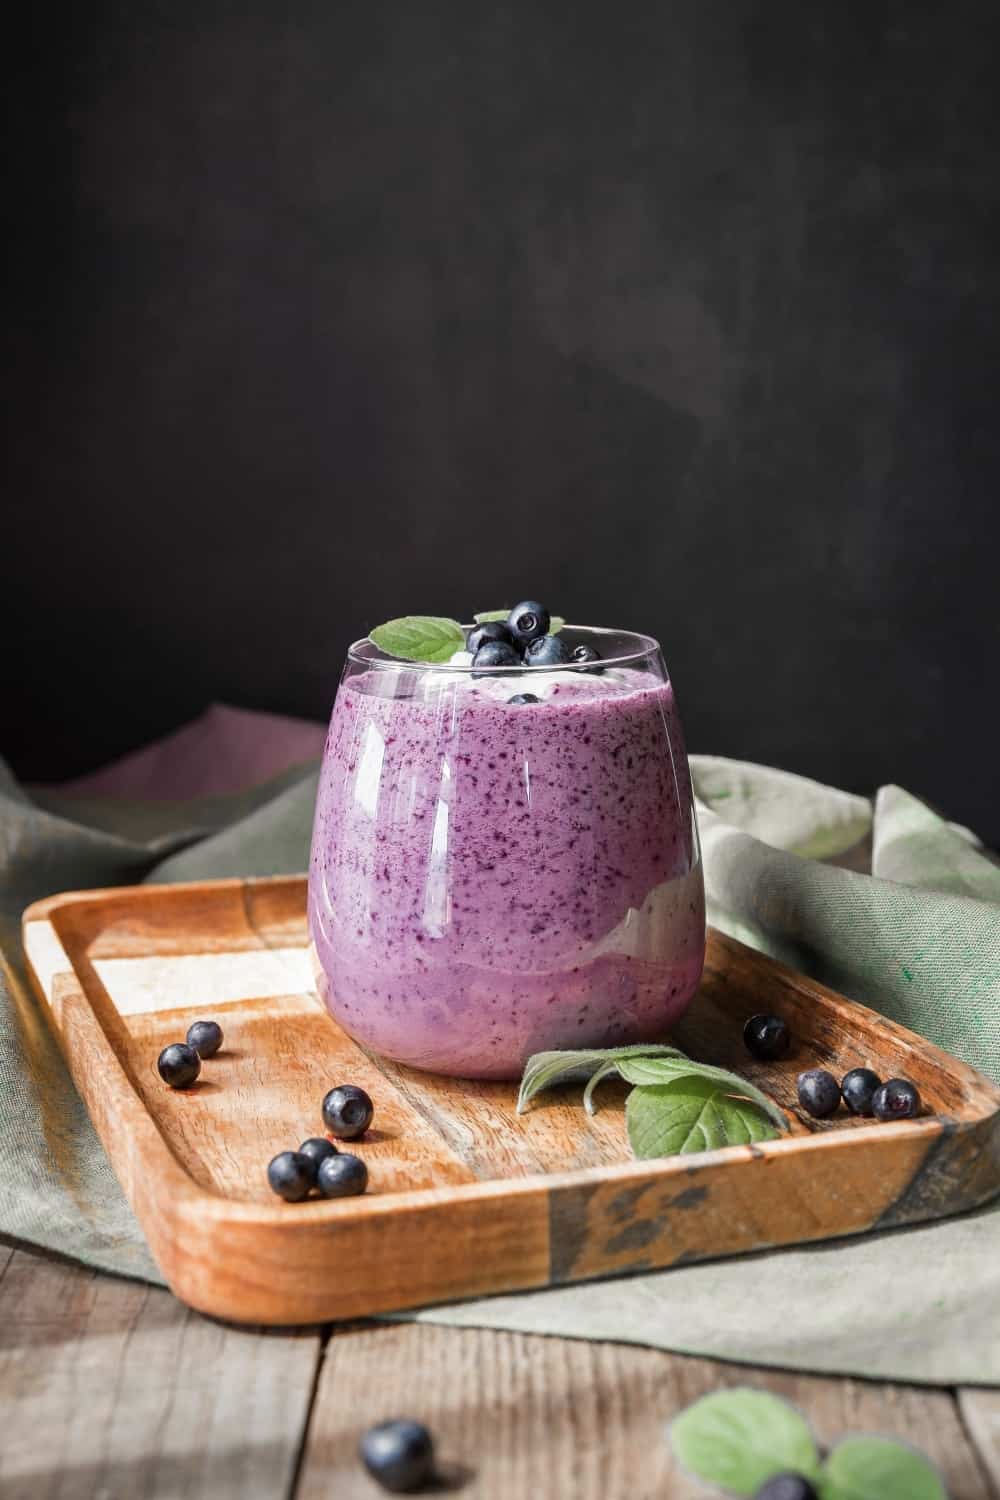 Blueberry smoothie on a wooden salver and black background